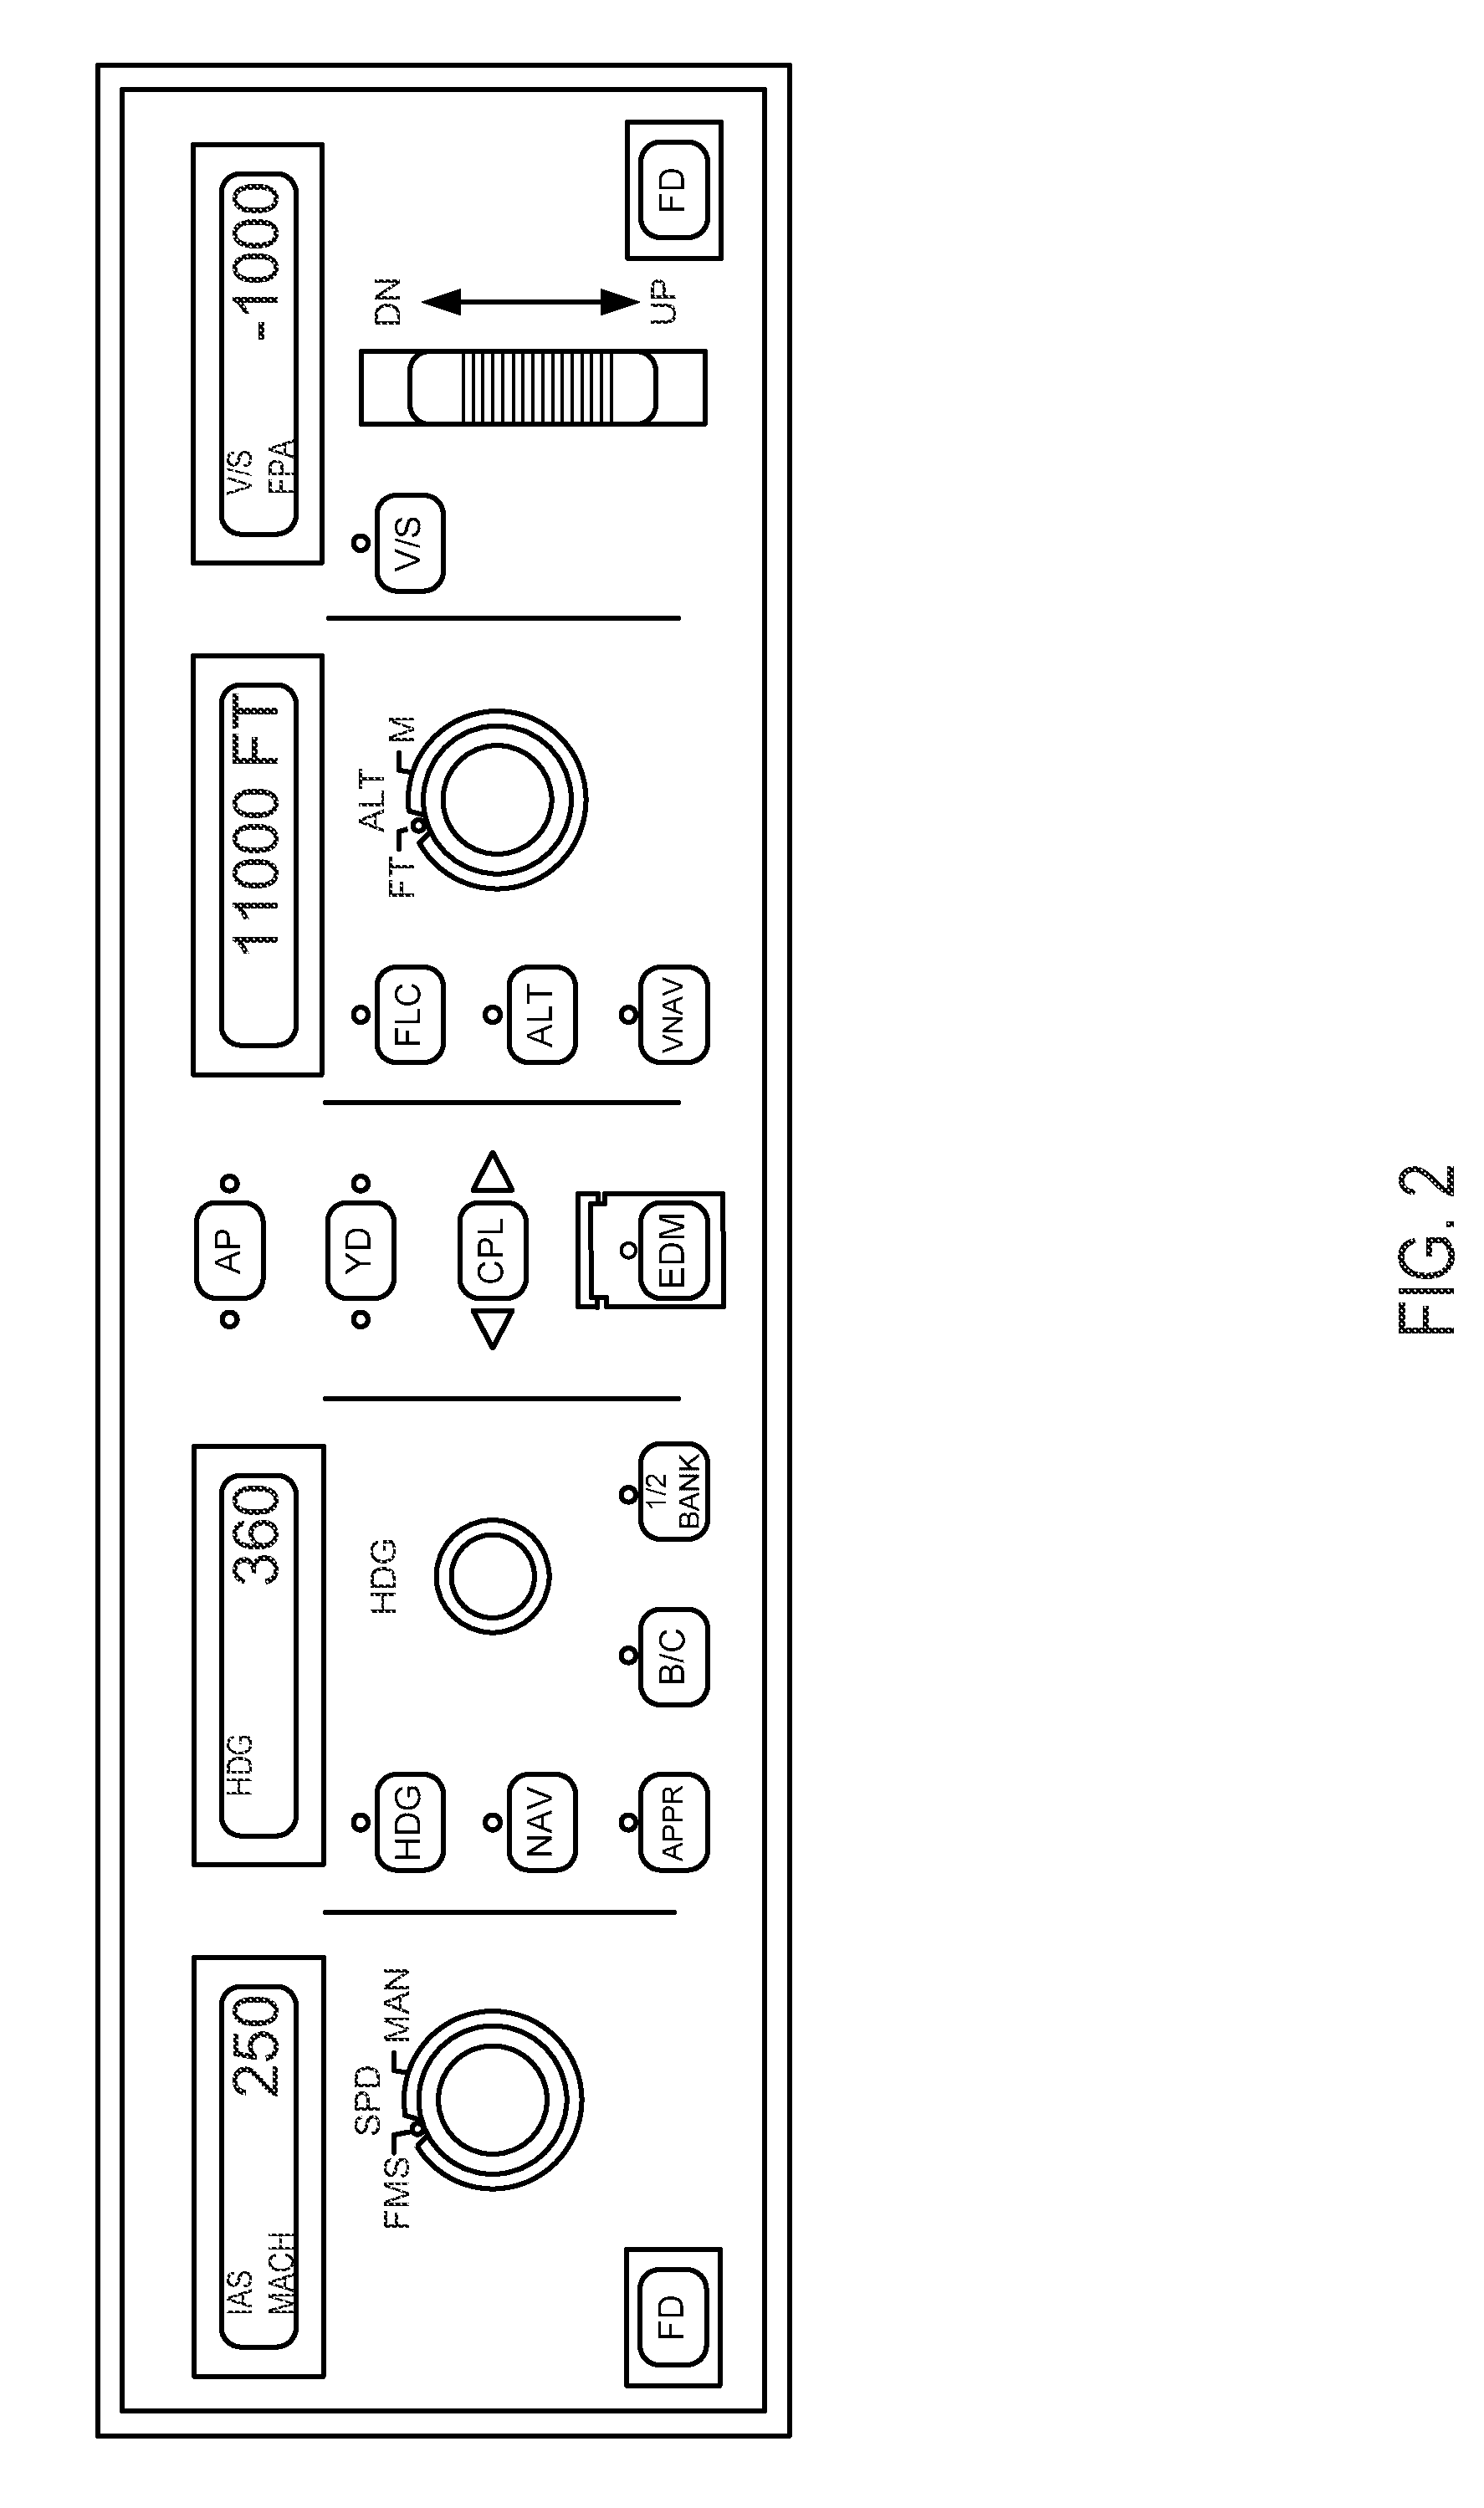 Event-based flight management system, device, and method